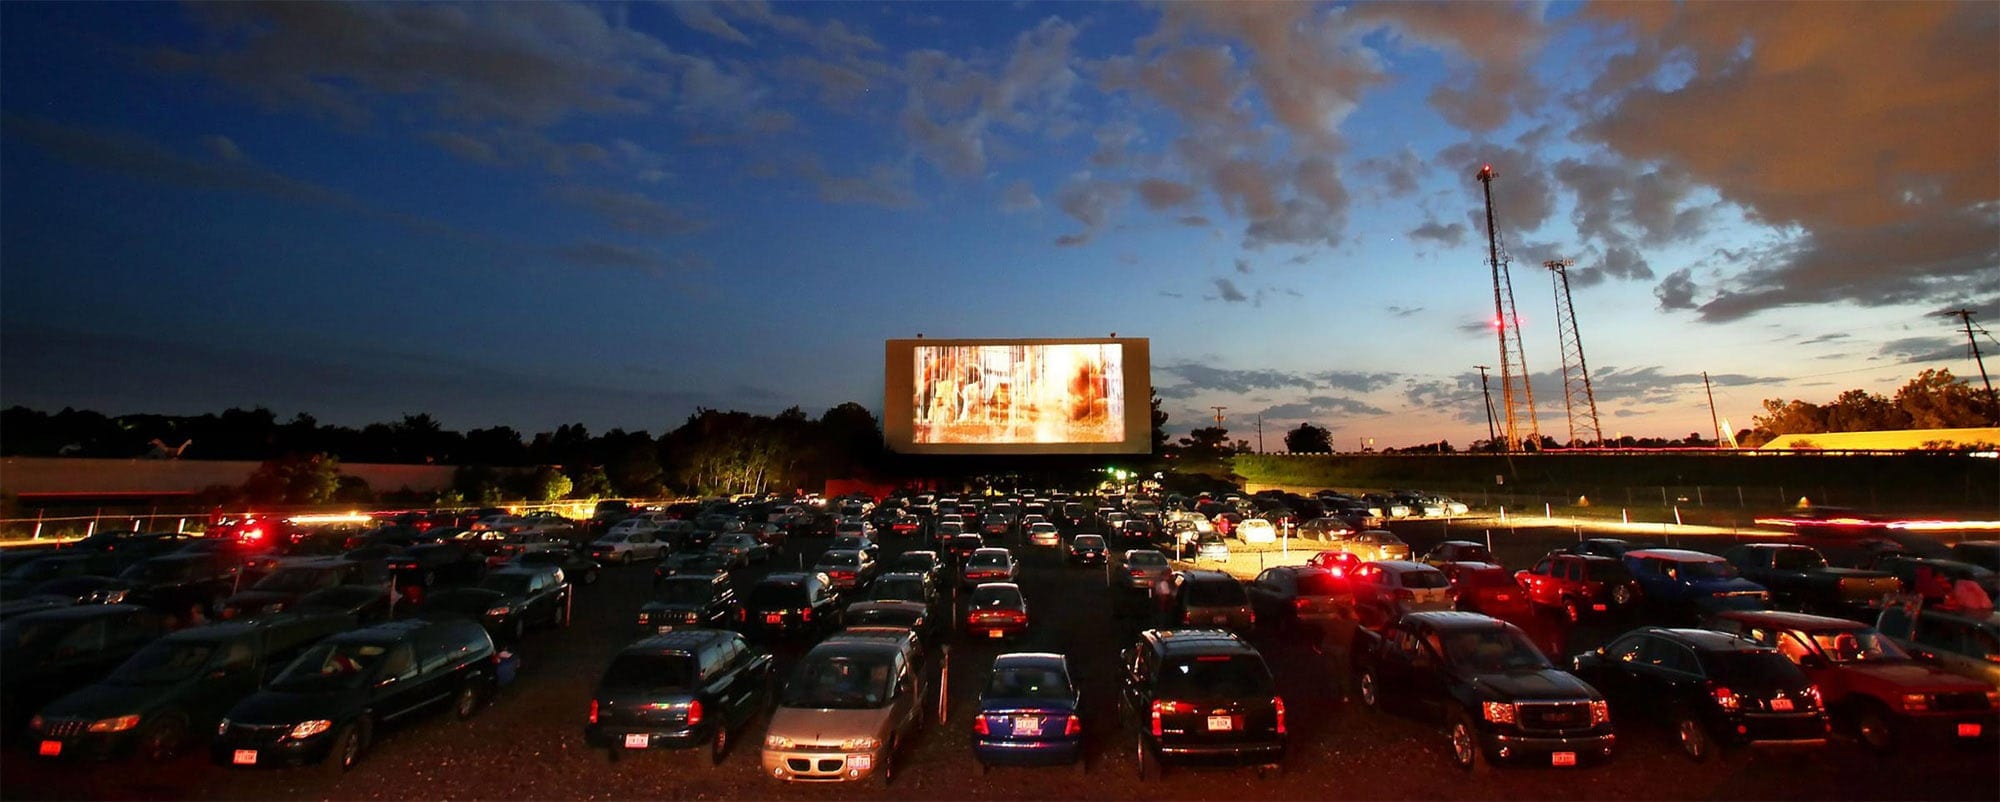 It’s time to support your local drive-in theater. Here are nine of the best drive-in theaters in the US that you should consider parking at.